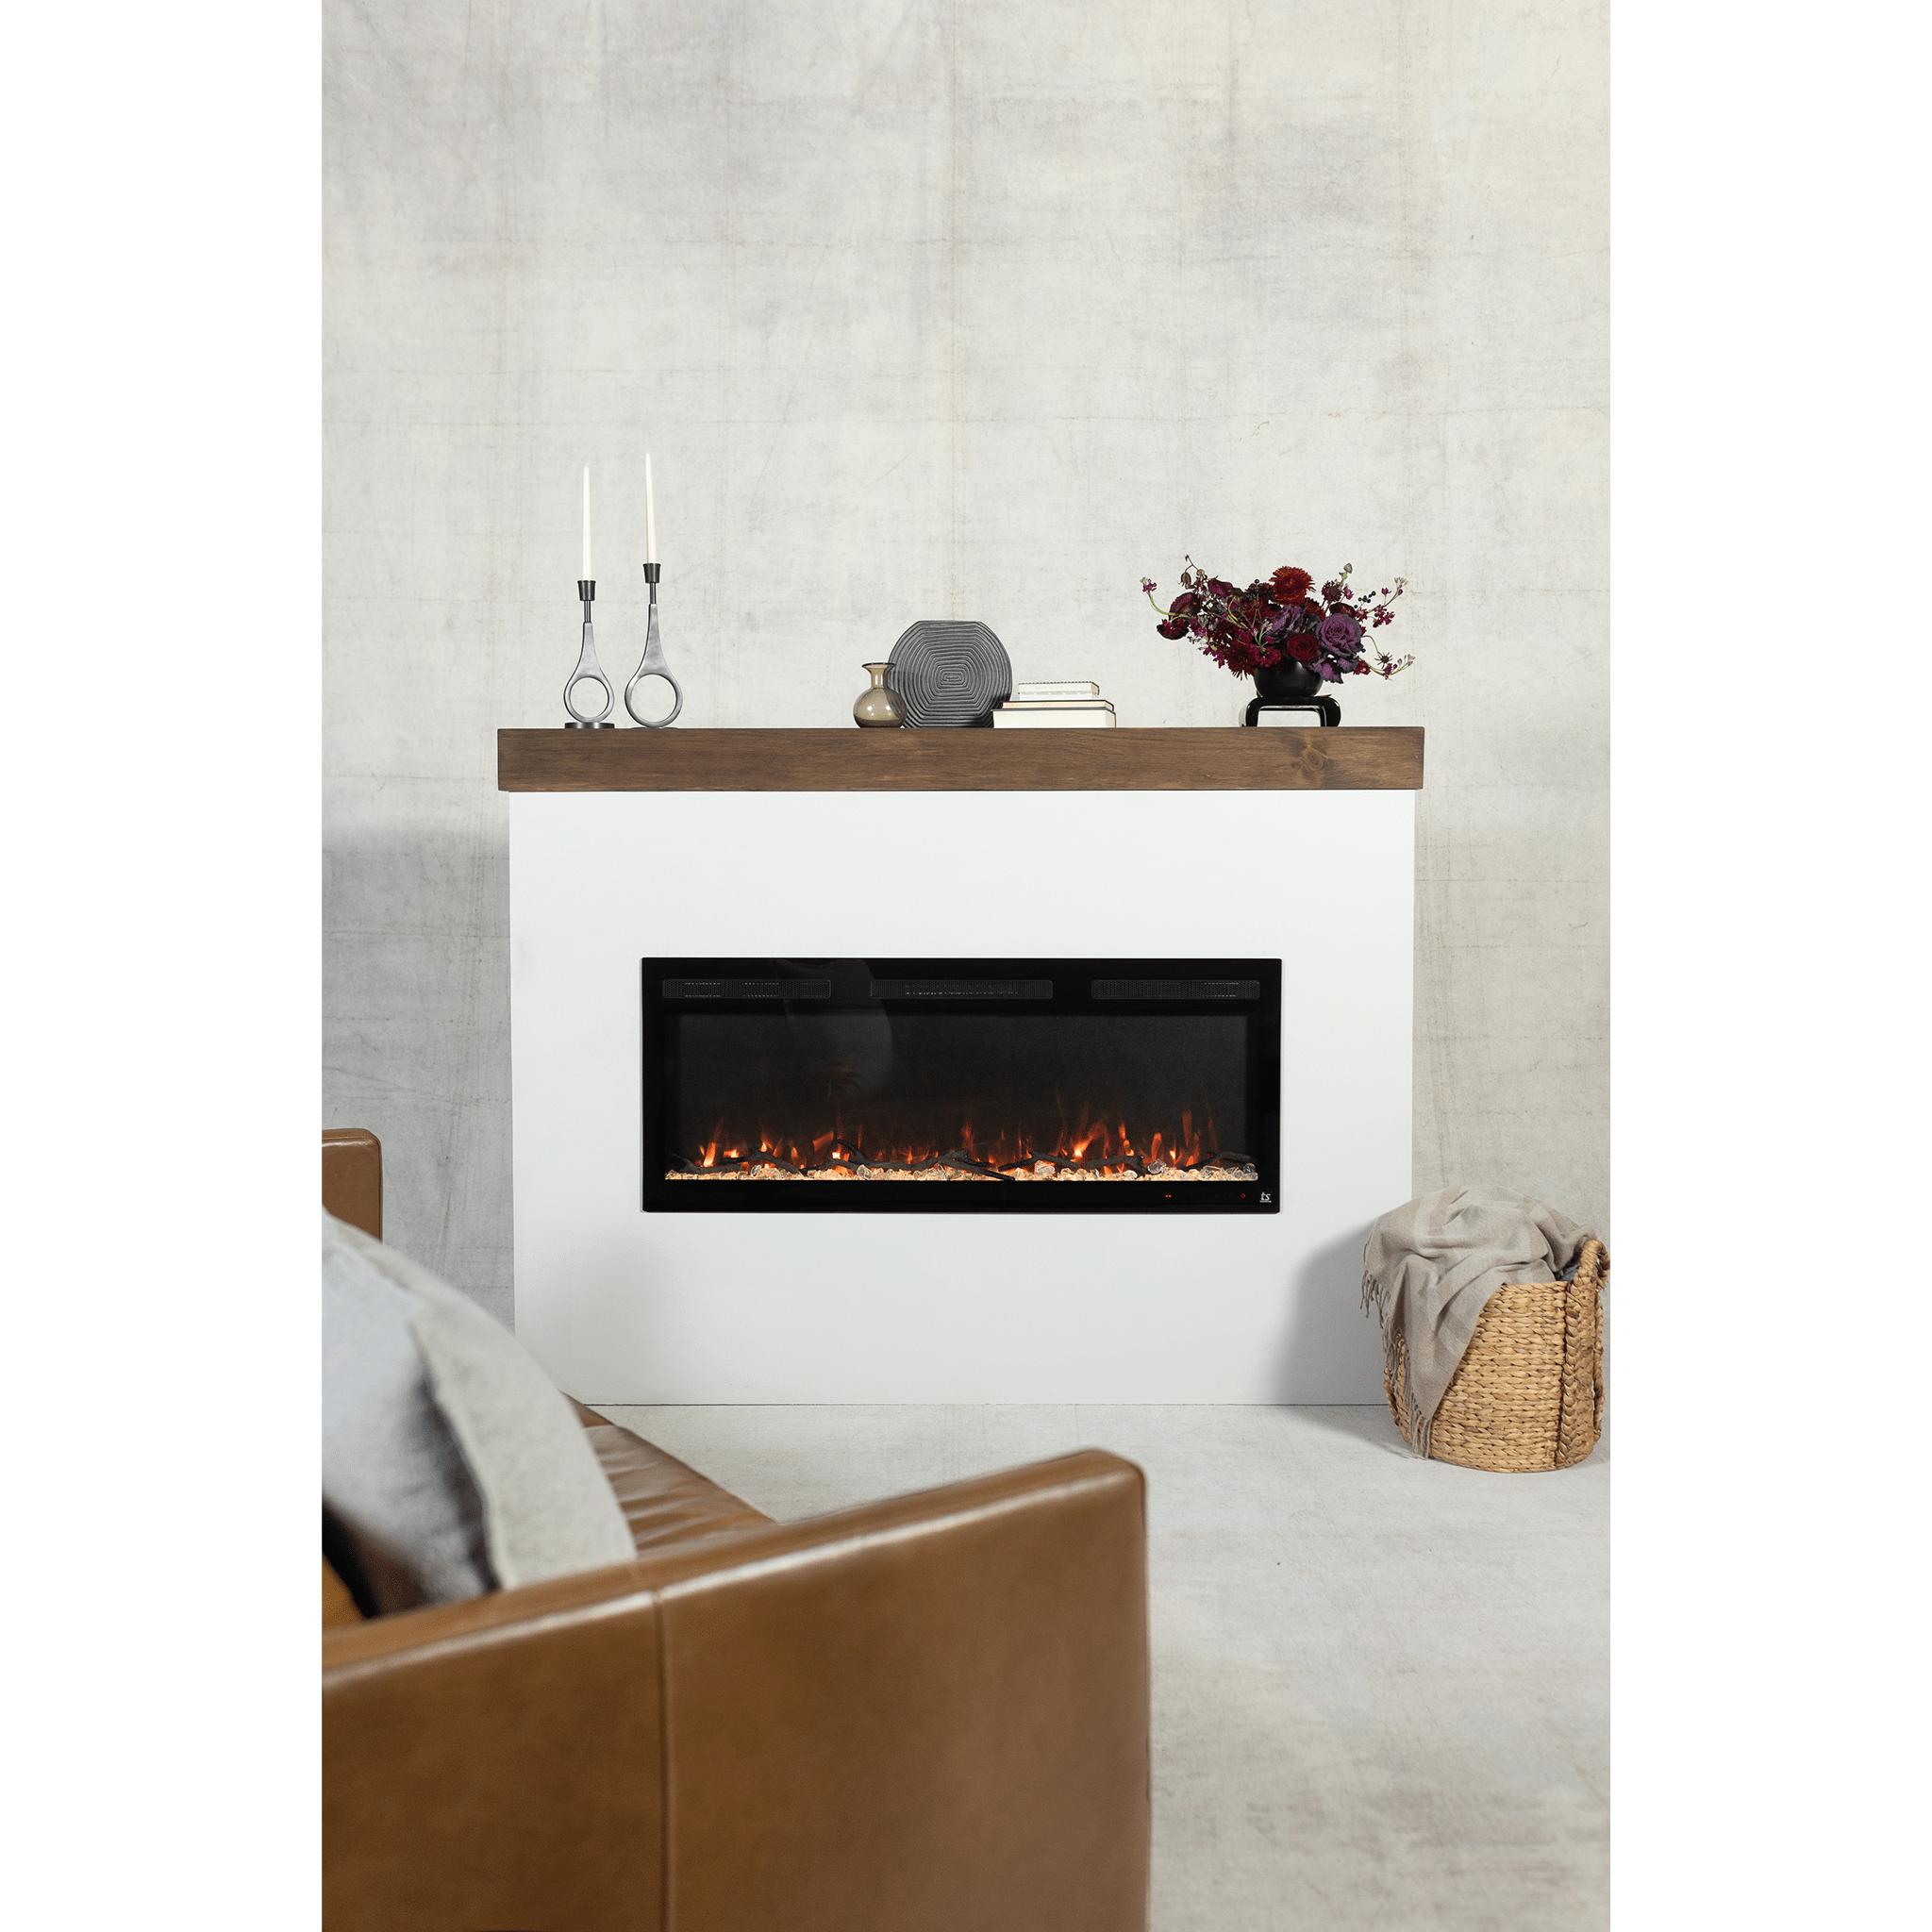 The Sideline Fury 50 Inch Recessed Smart Electric Fireplace 80054room setting